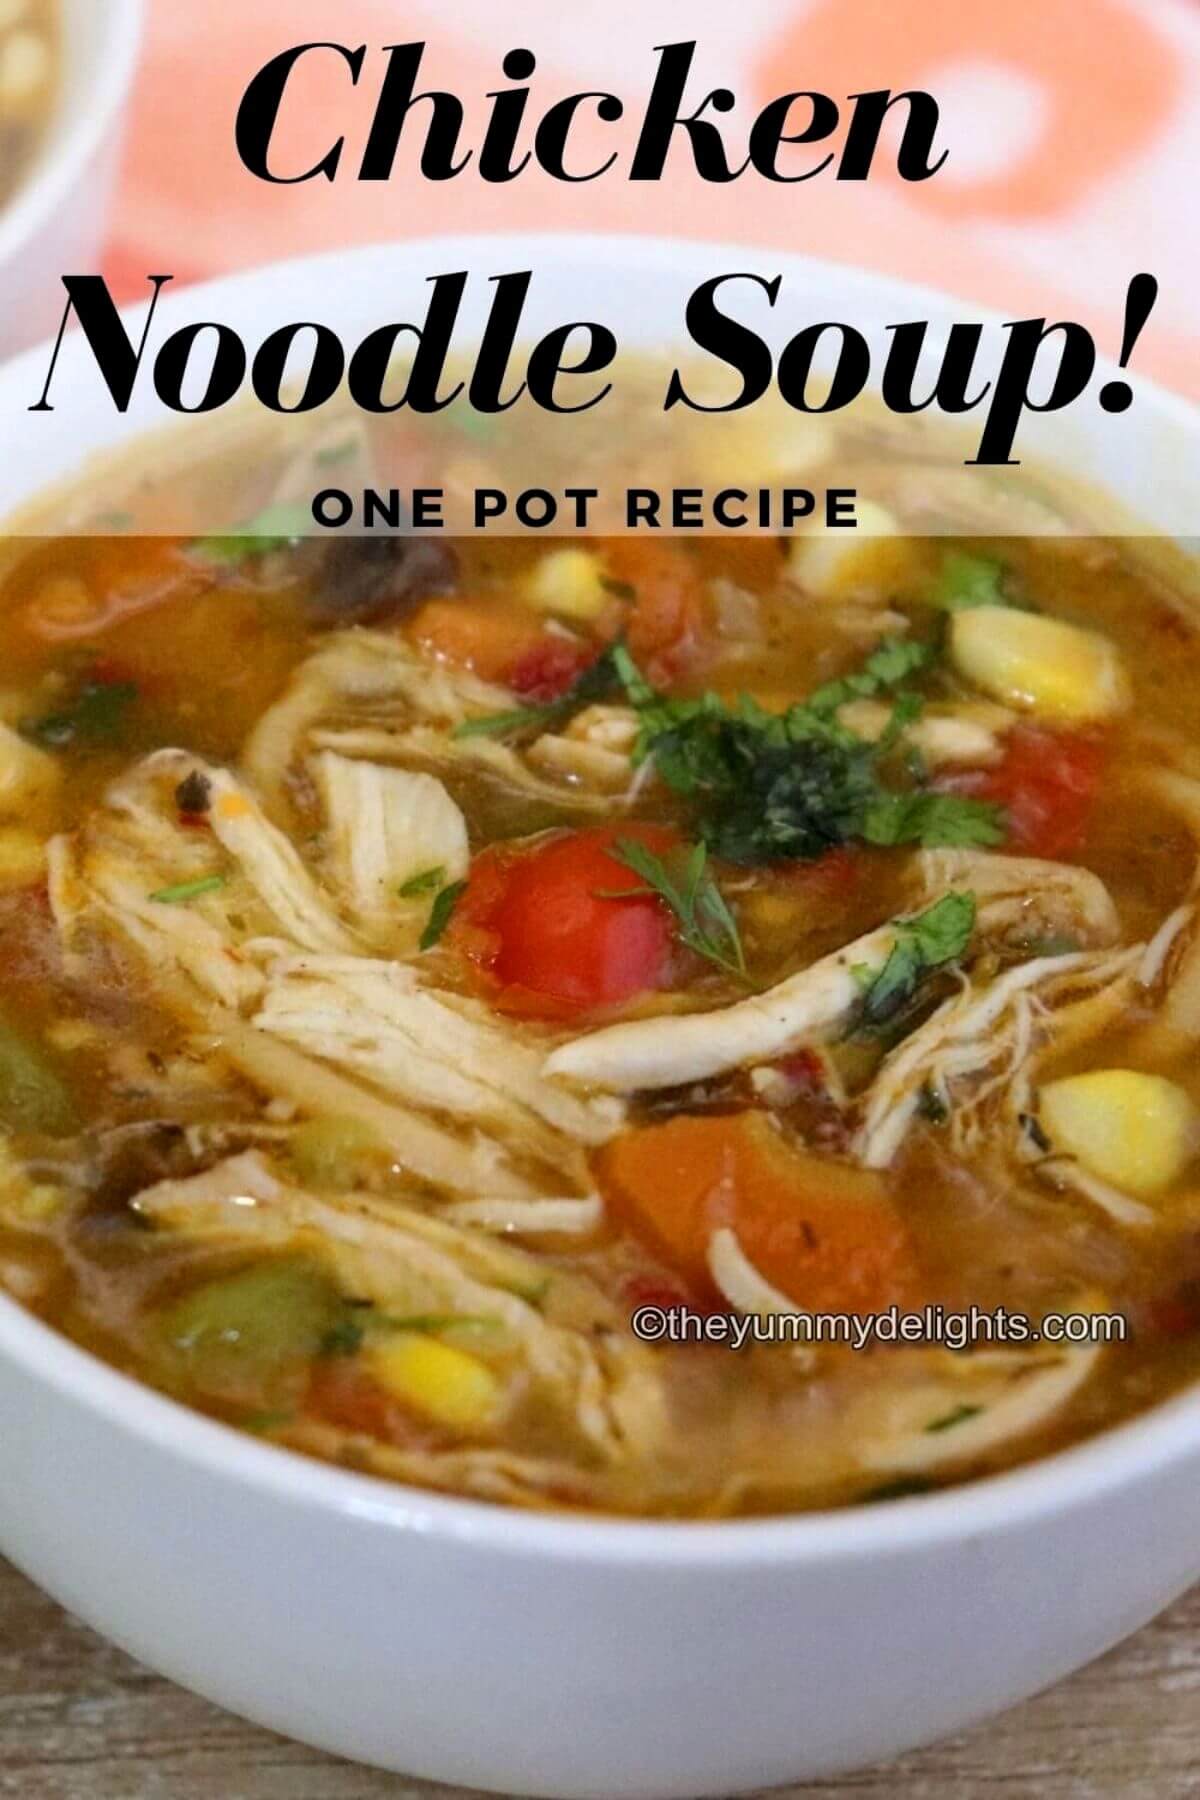 close-up of chicken noodle soup in a white bowl with text overlay chicken noodle soup - one pot recipe.